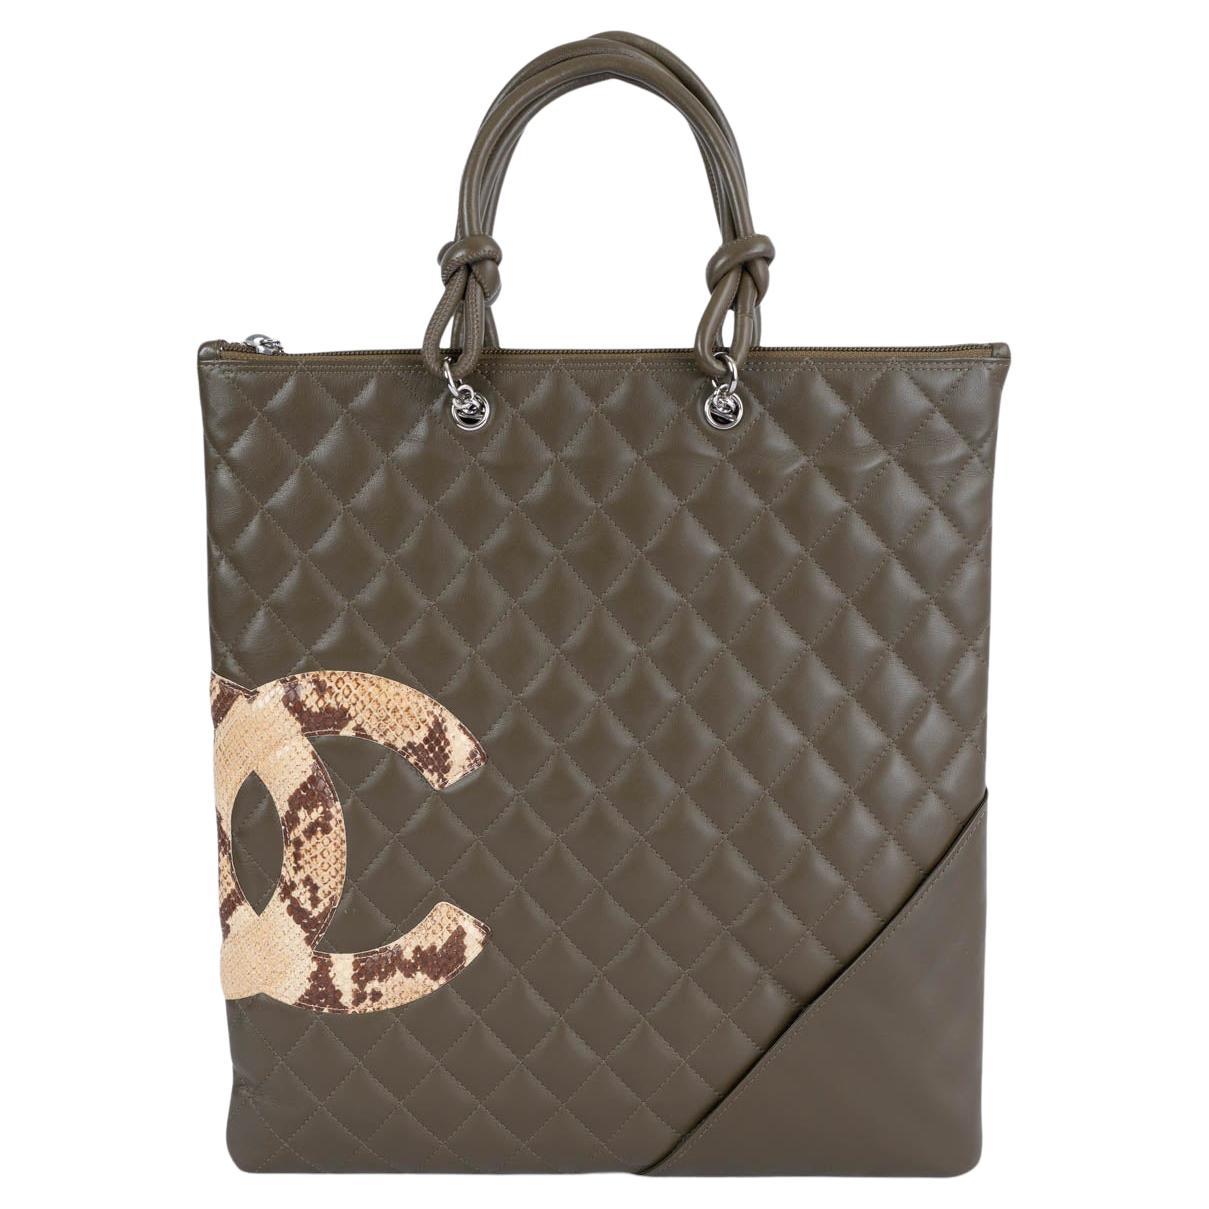 Chanel Olive Green Quilted Leather 2005 Cambon Tote Bag